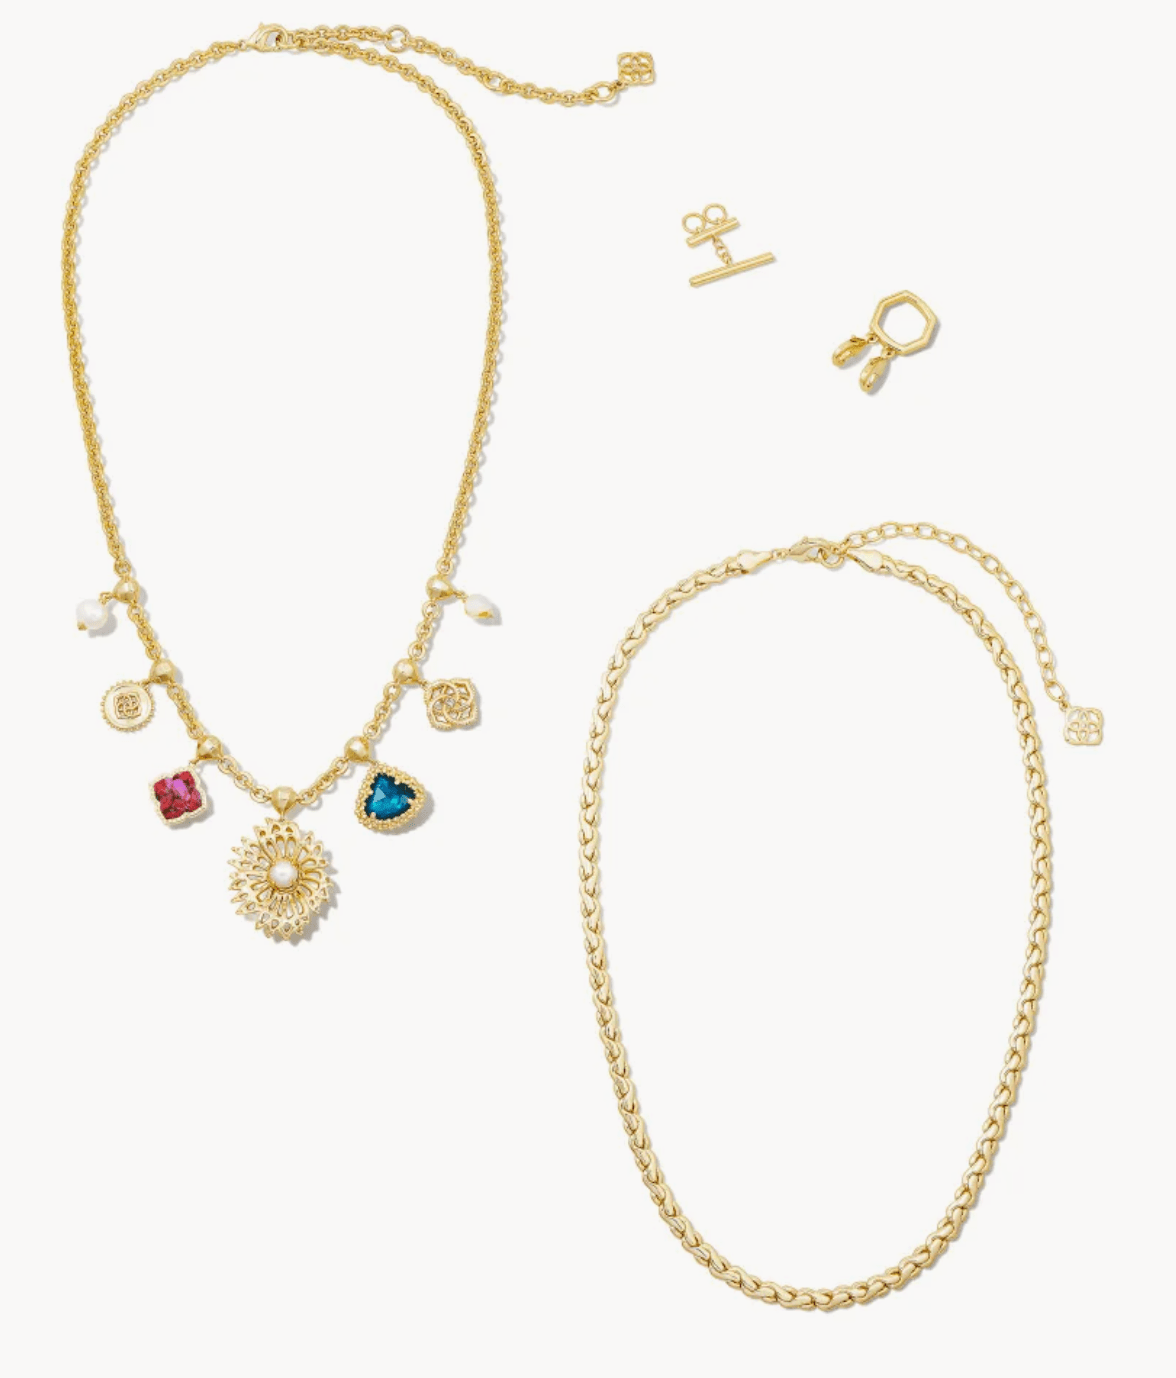 Kendra Scott - Brielle Convertible Gold Charm Necklace in Multi Mix - Findlay Rowe Designs